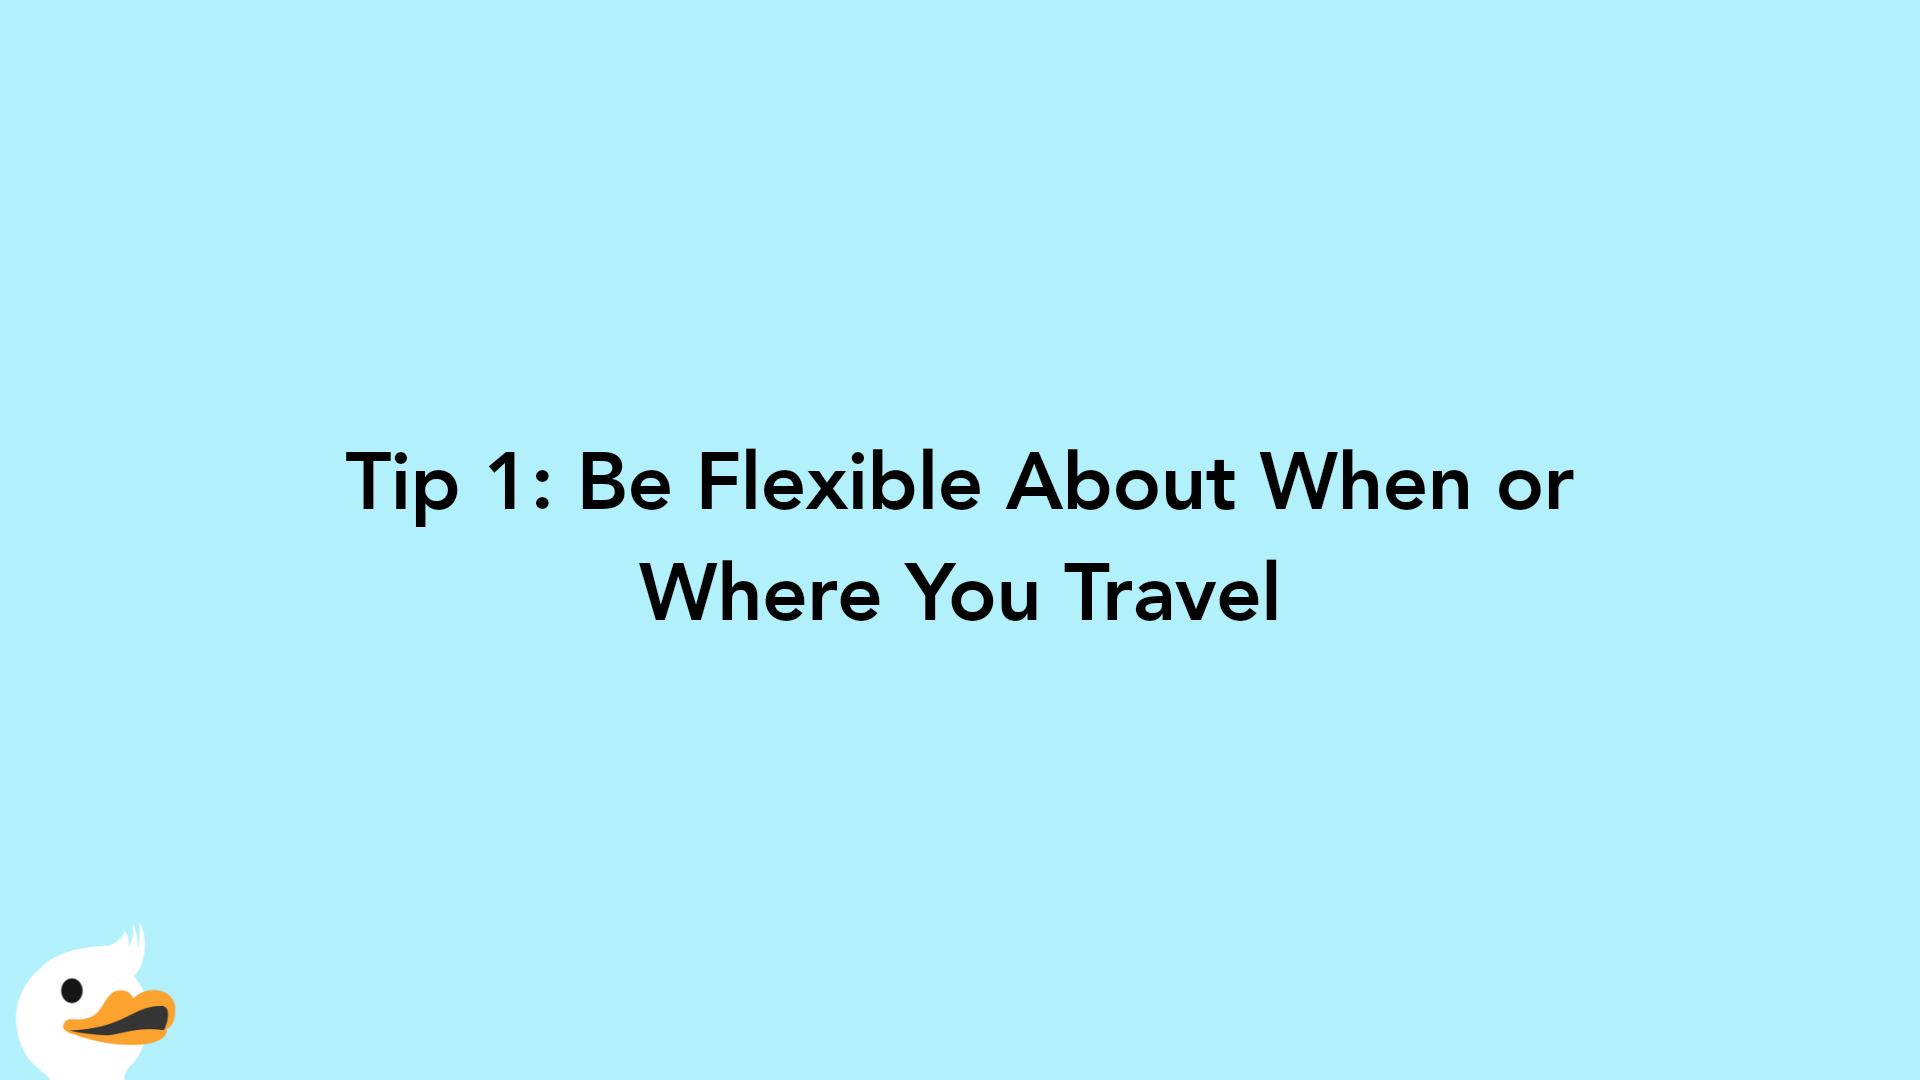 Tip 1: Be Flexible About When or Where You Travel